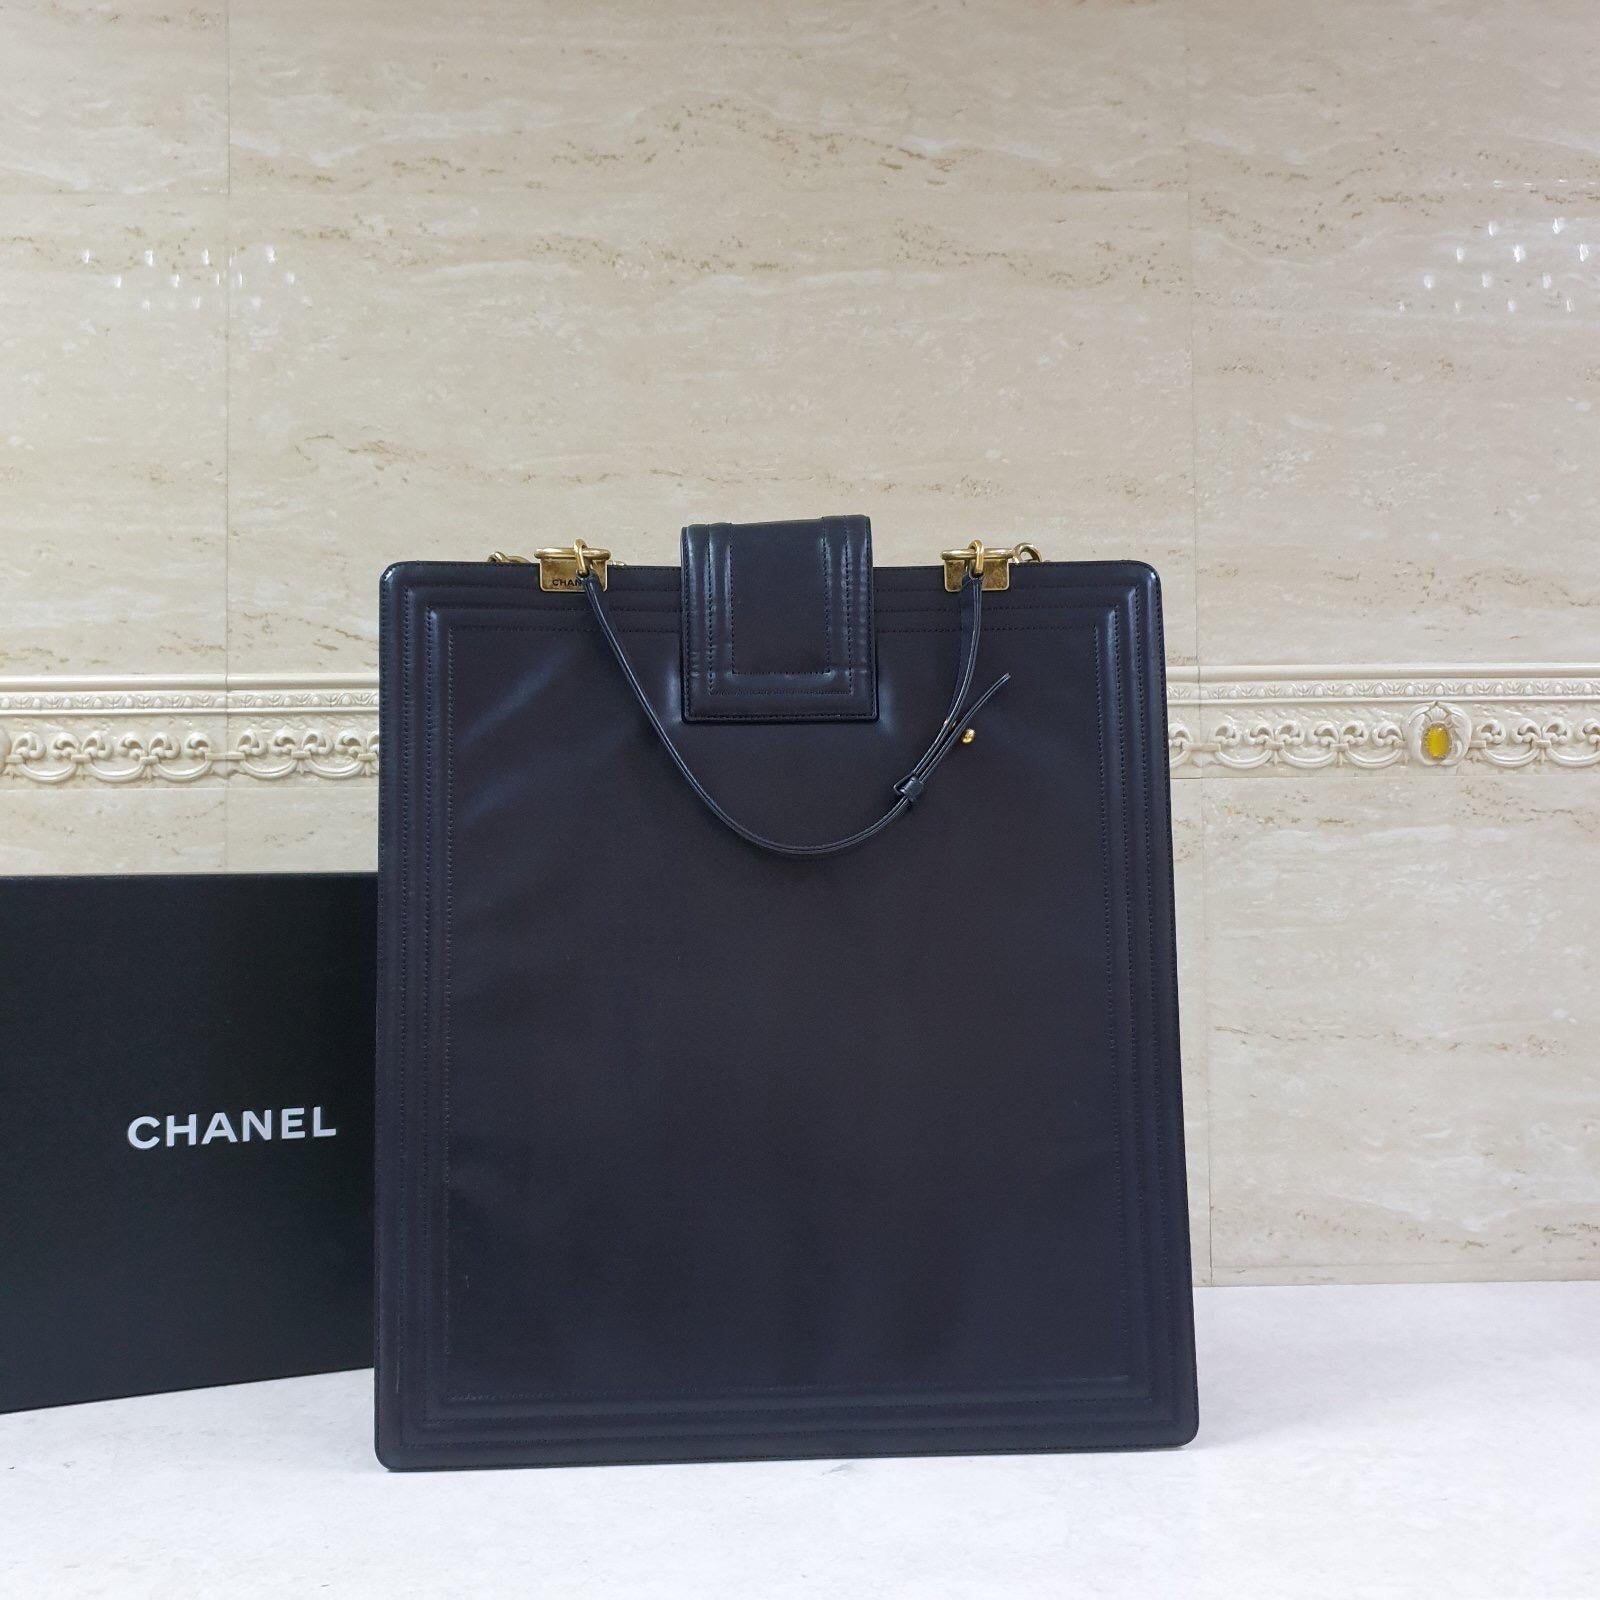 Chanel Boy North to South Black Leather Tote Bag 2